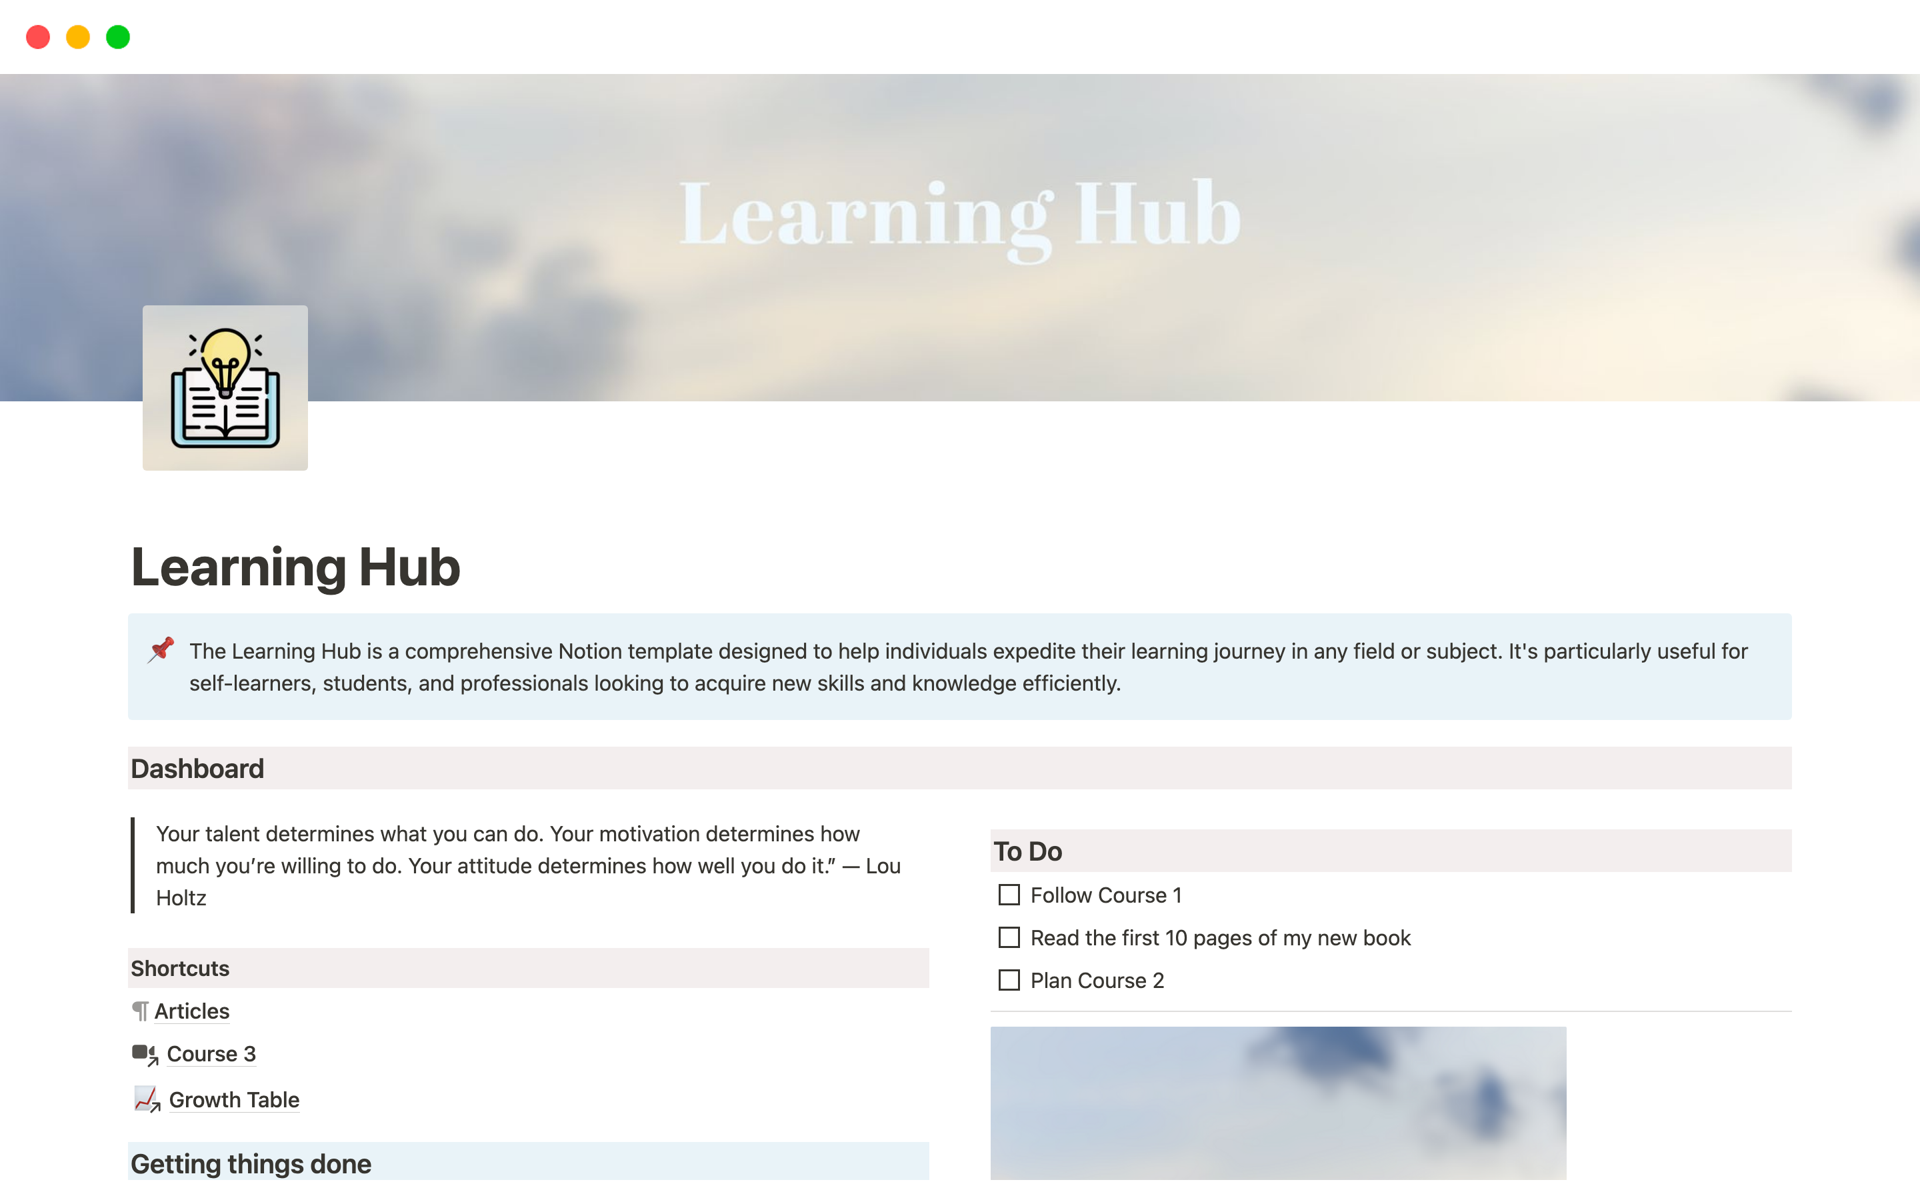 The Learning Hub, a complete Notion template, speeds up learning in any subject, especially for self-learners, students, and professionals seeking efficient skill and knowledge acquisition.